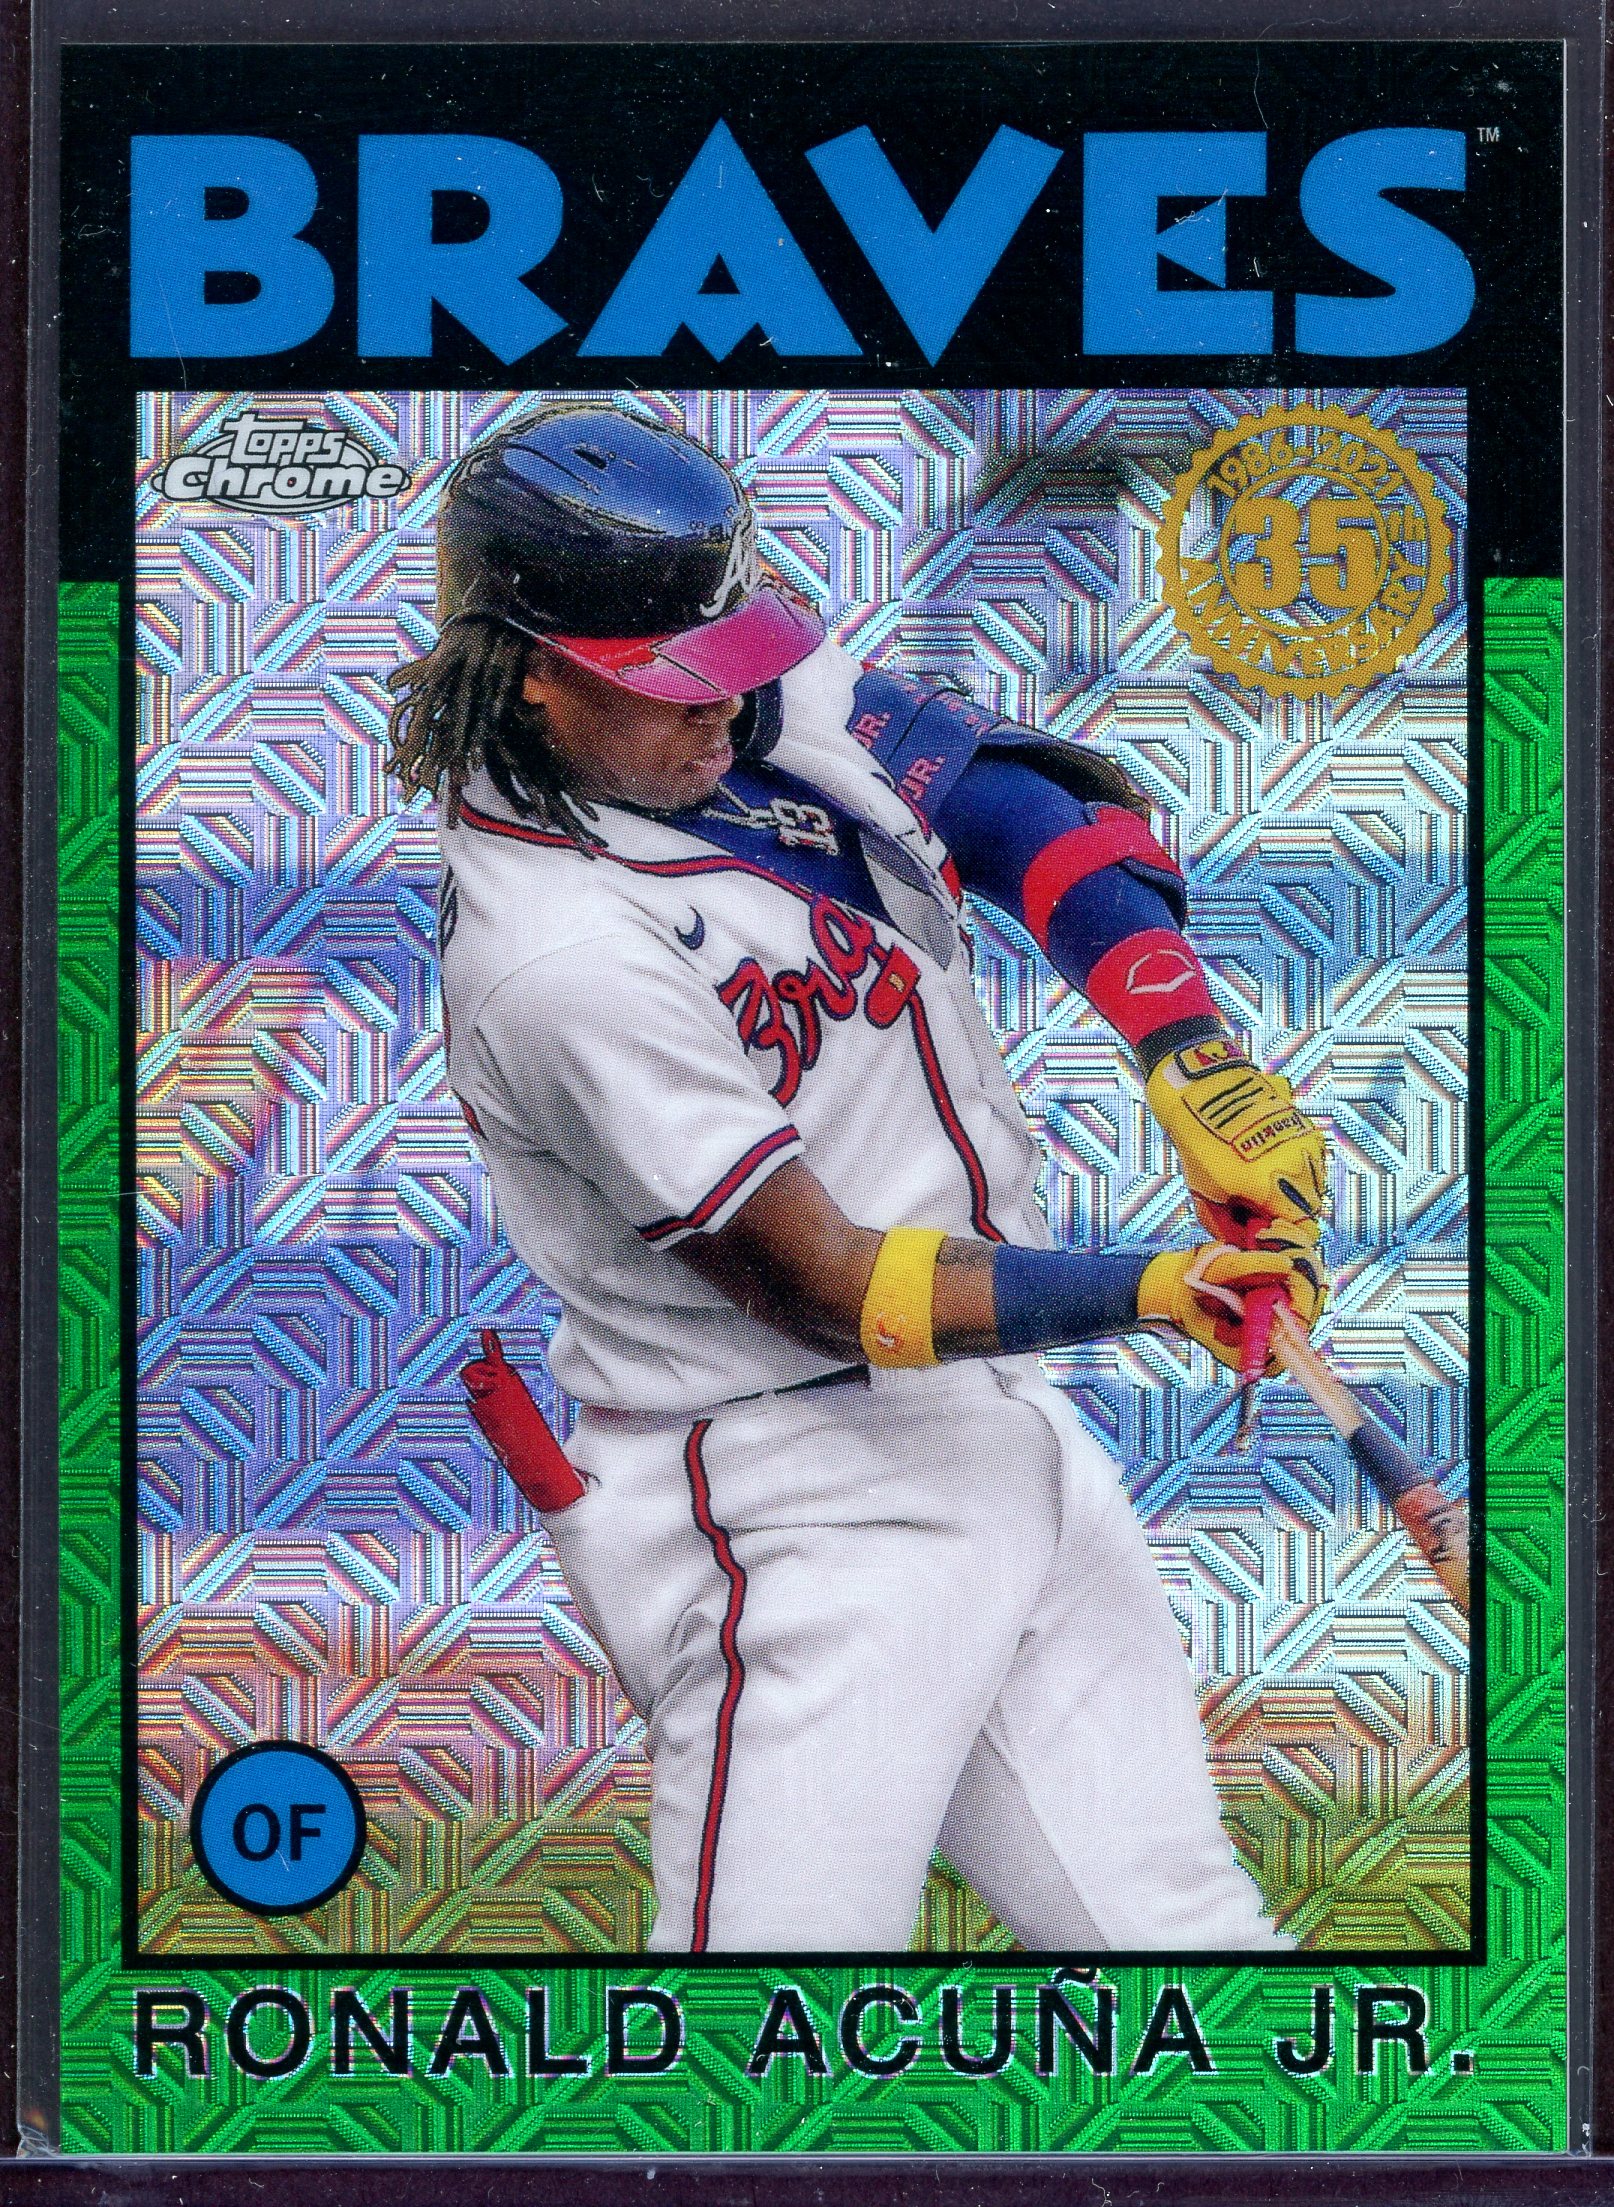 2021 Topps '86 Topps Silver Pack Chrome Series 2 Green Refractors #86TC65 Ronald Acuna Jr.